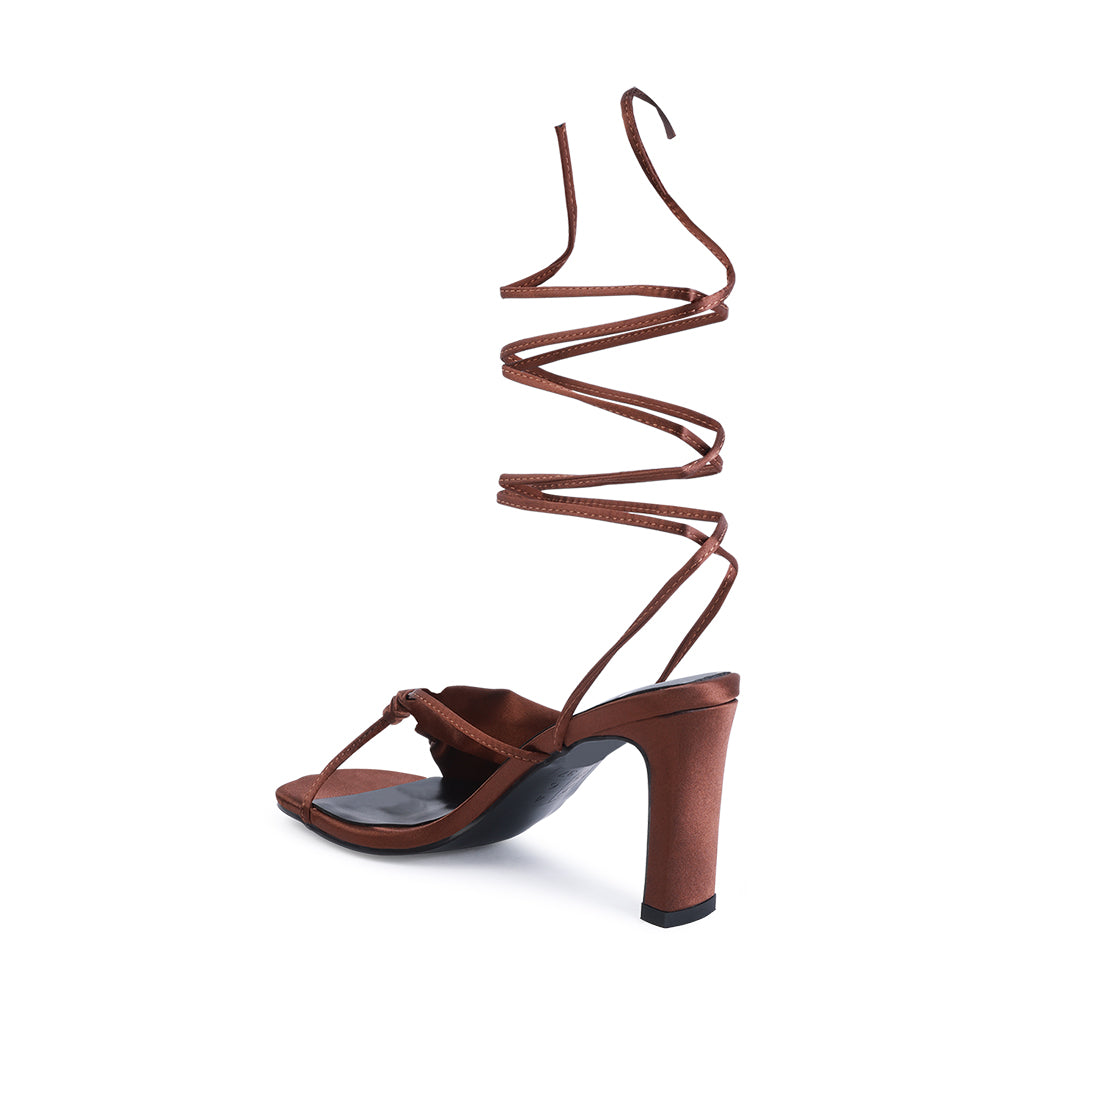 Tan Ruched Satin Tie Up Block Heeled Sandals